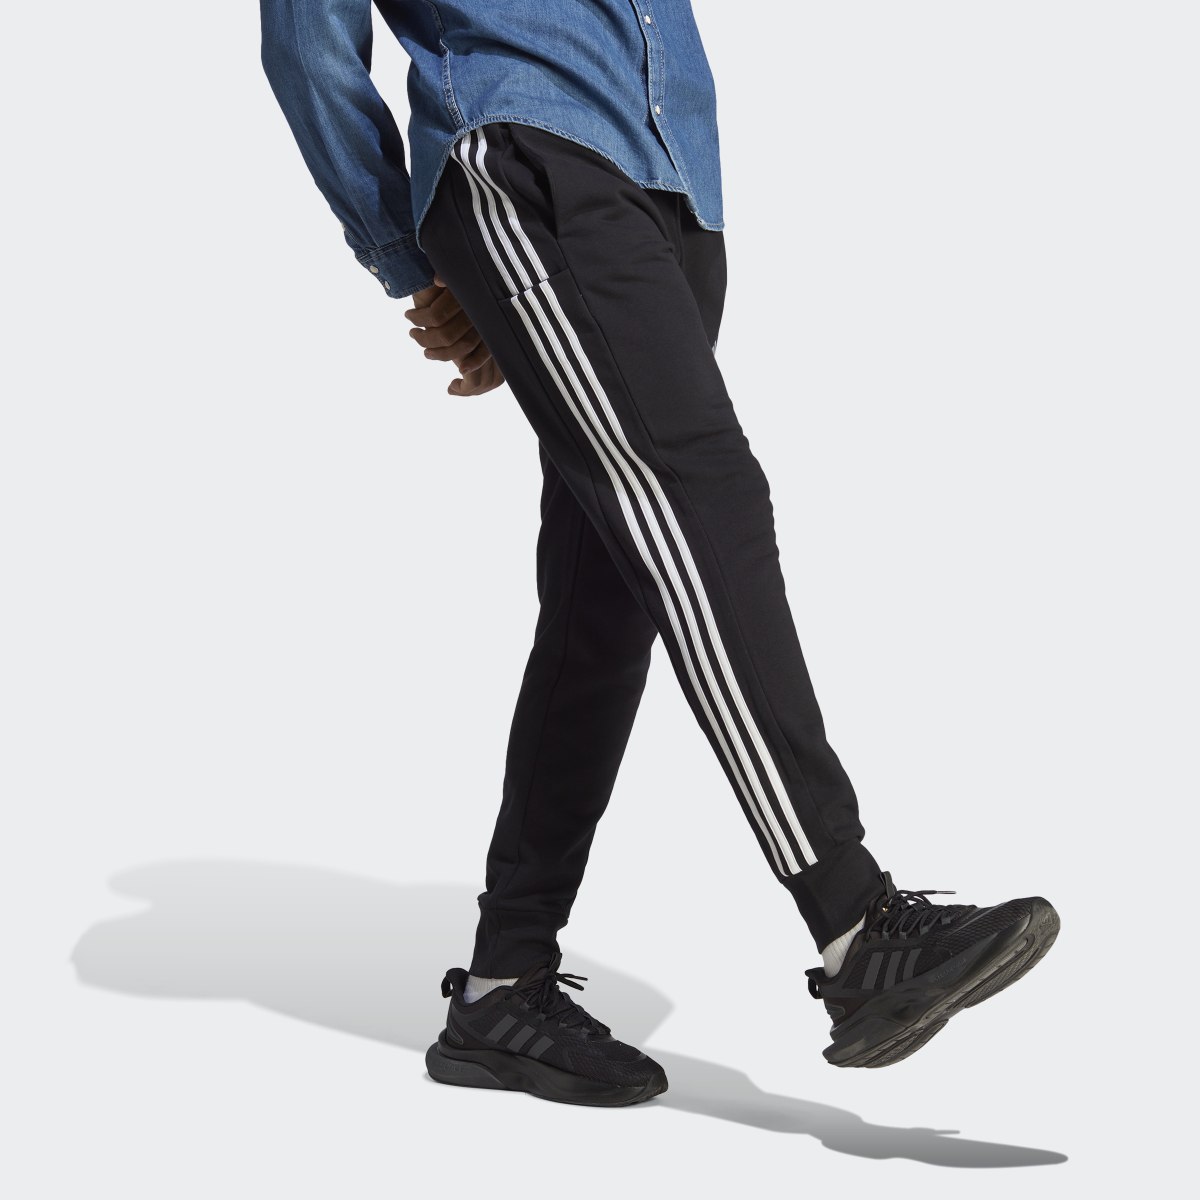 Adidas Essentials French Terry Tapered Cuff 3-Stripes Pants. 4